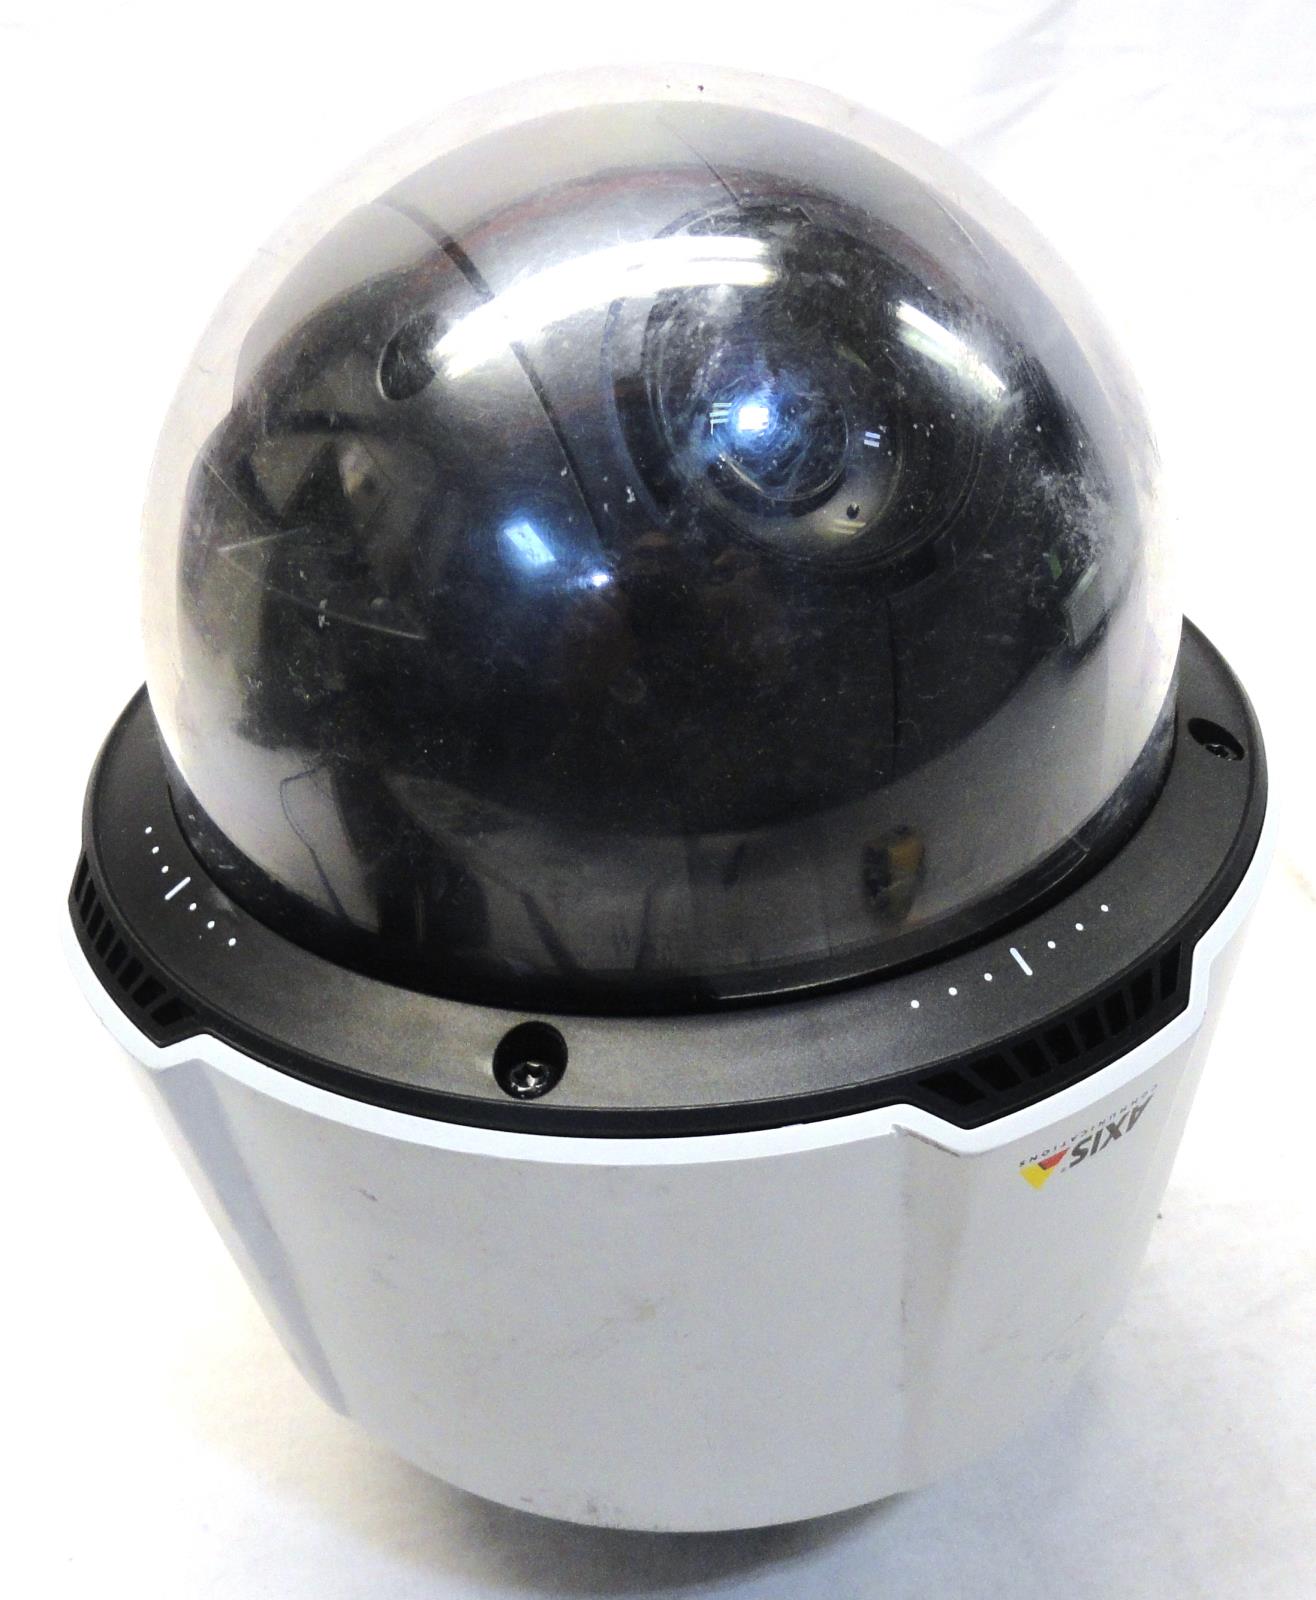 AXIS P5635-E PTZ Dome Network Camera | HDTV 1080p and 30x Optical Zoom ...